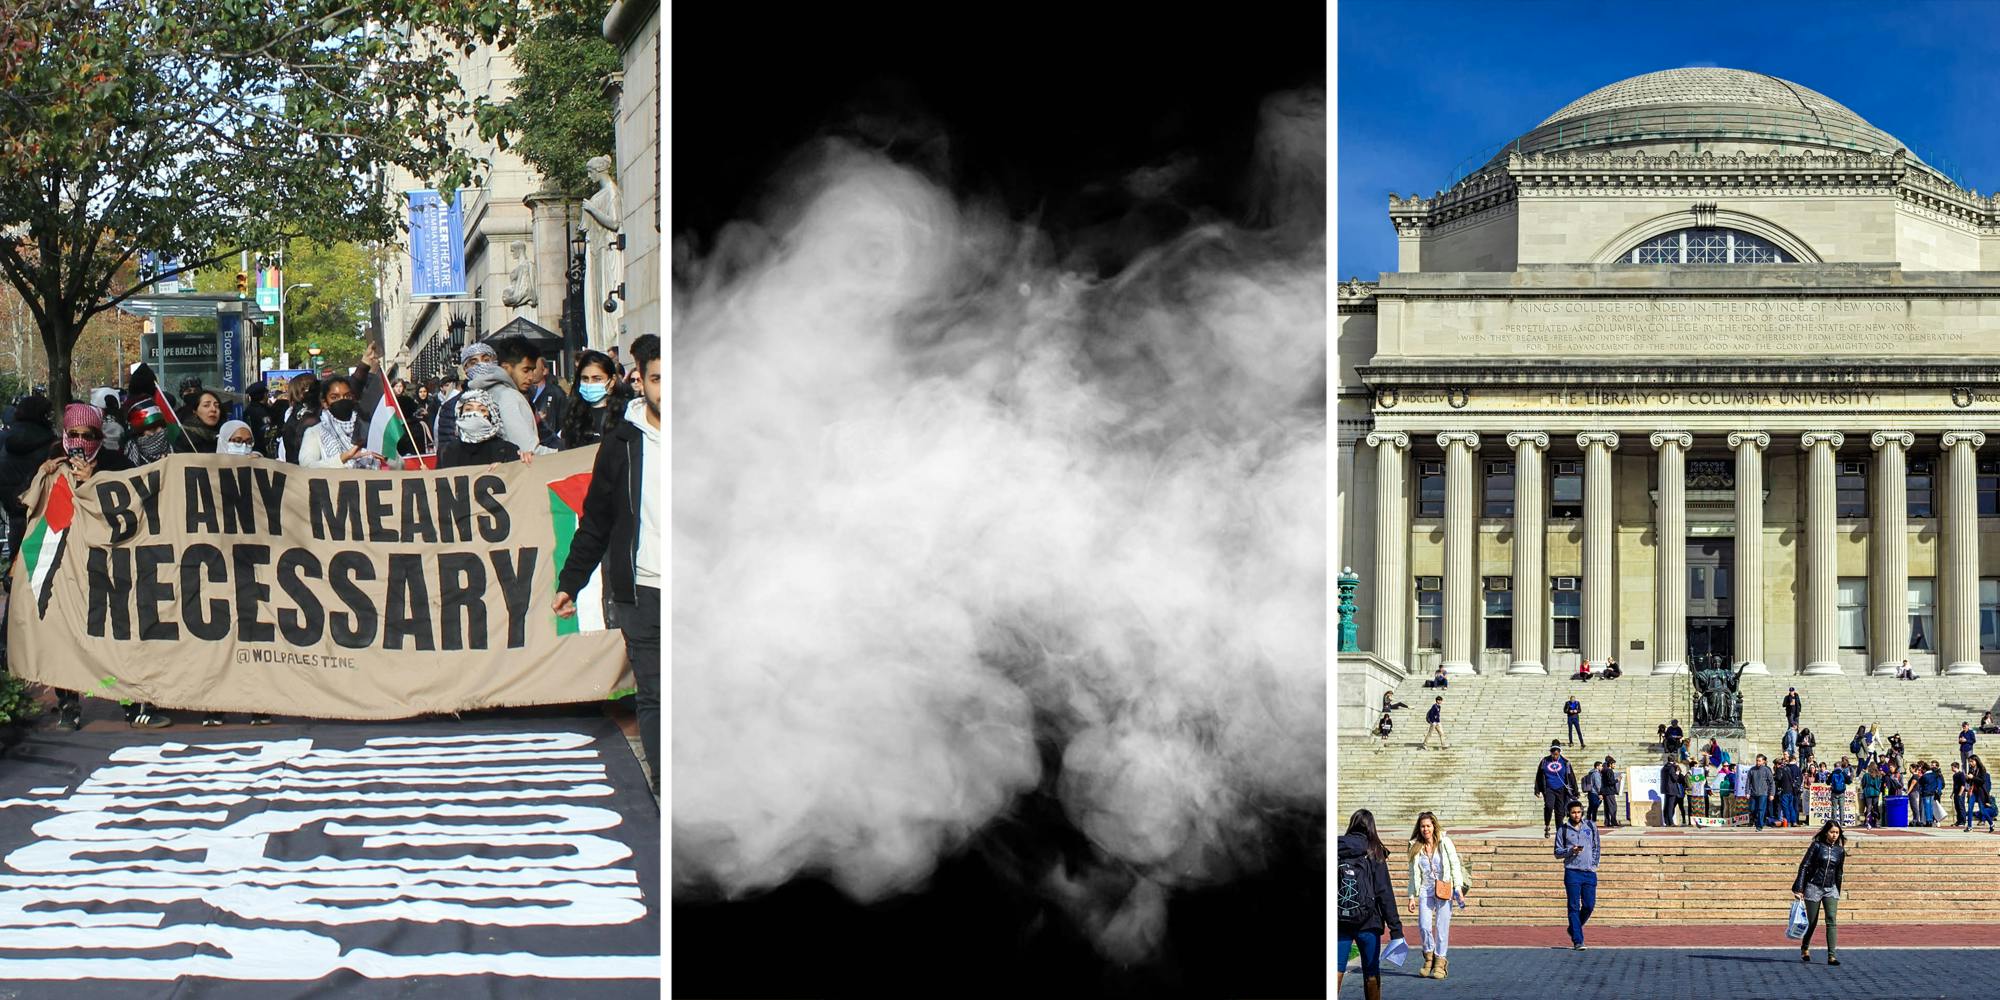 People with banners at protest on Broadway outside of Columbia University campus after suspension of Students for Justice in Palestine group(r), Smoke(c), Columbia University(r)